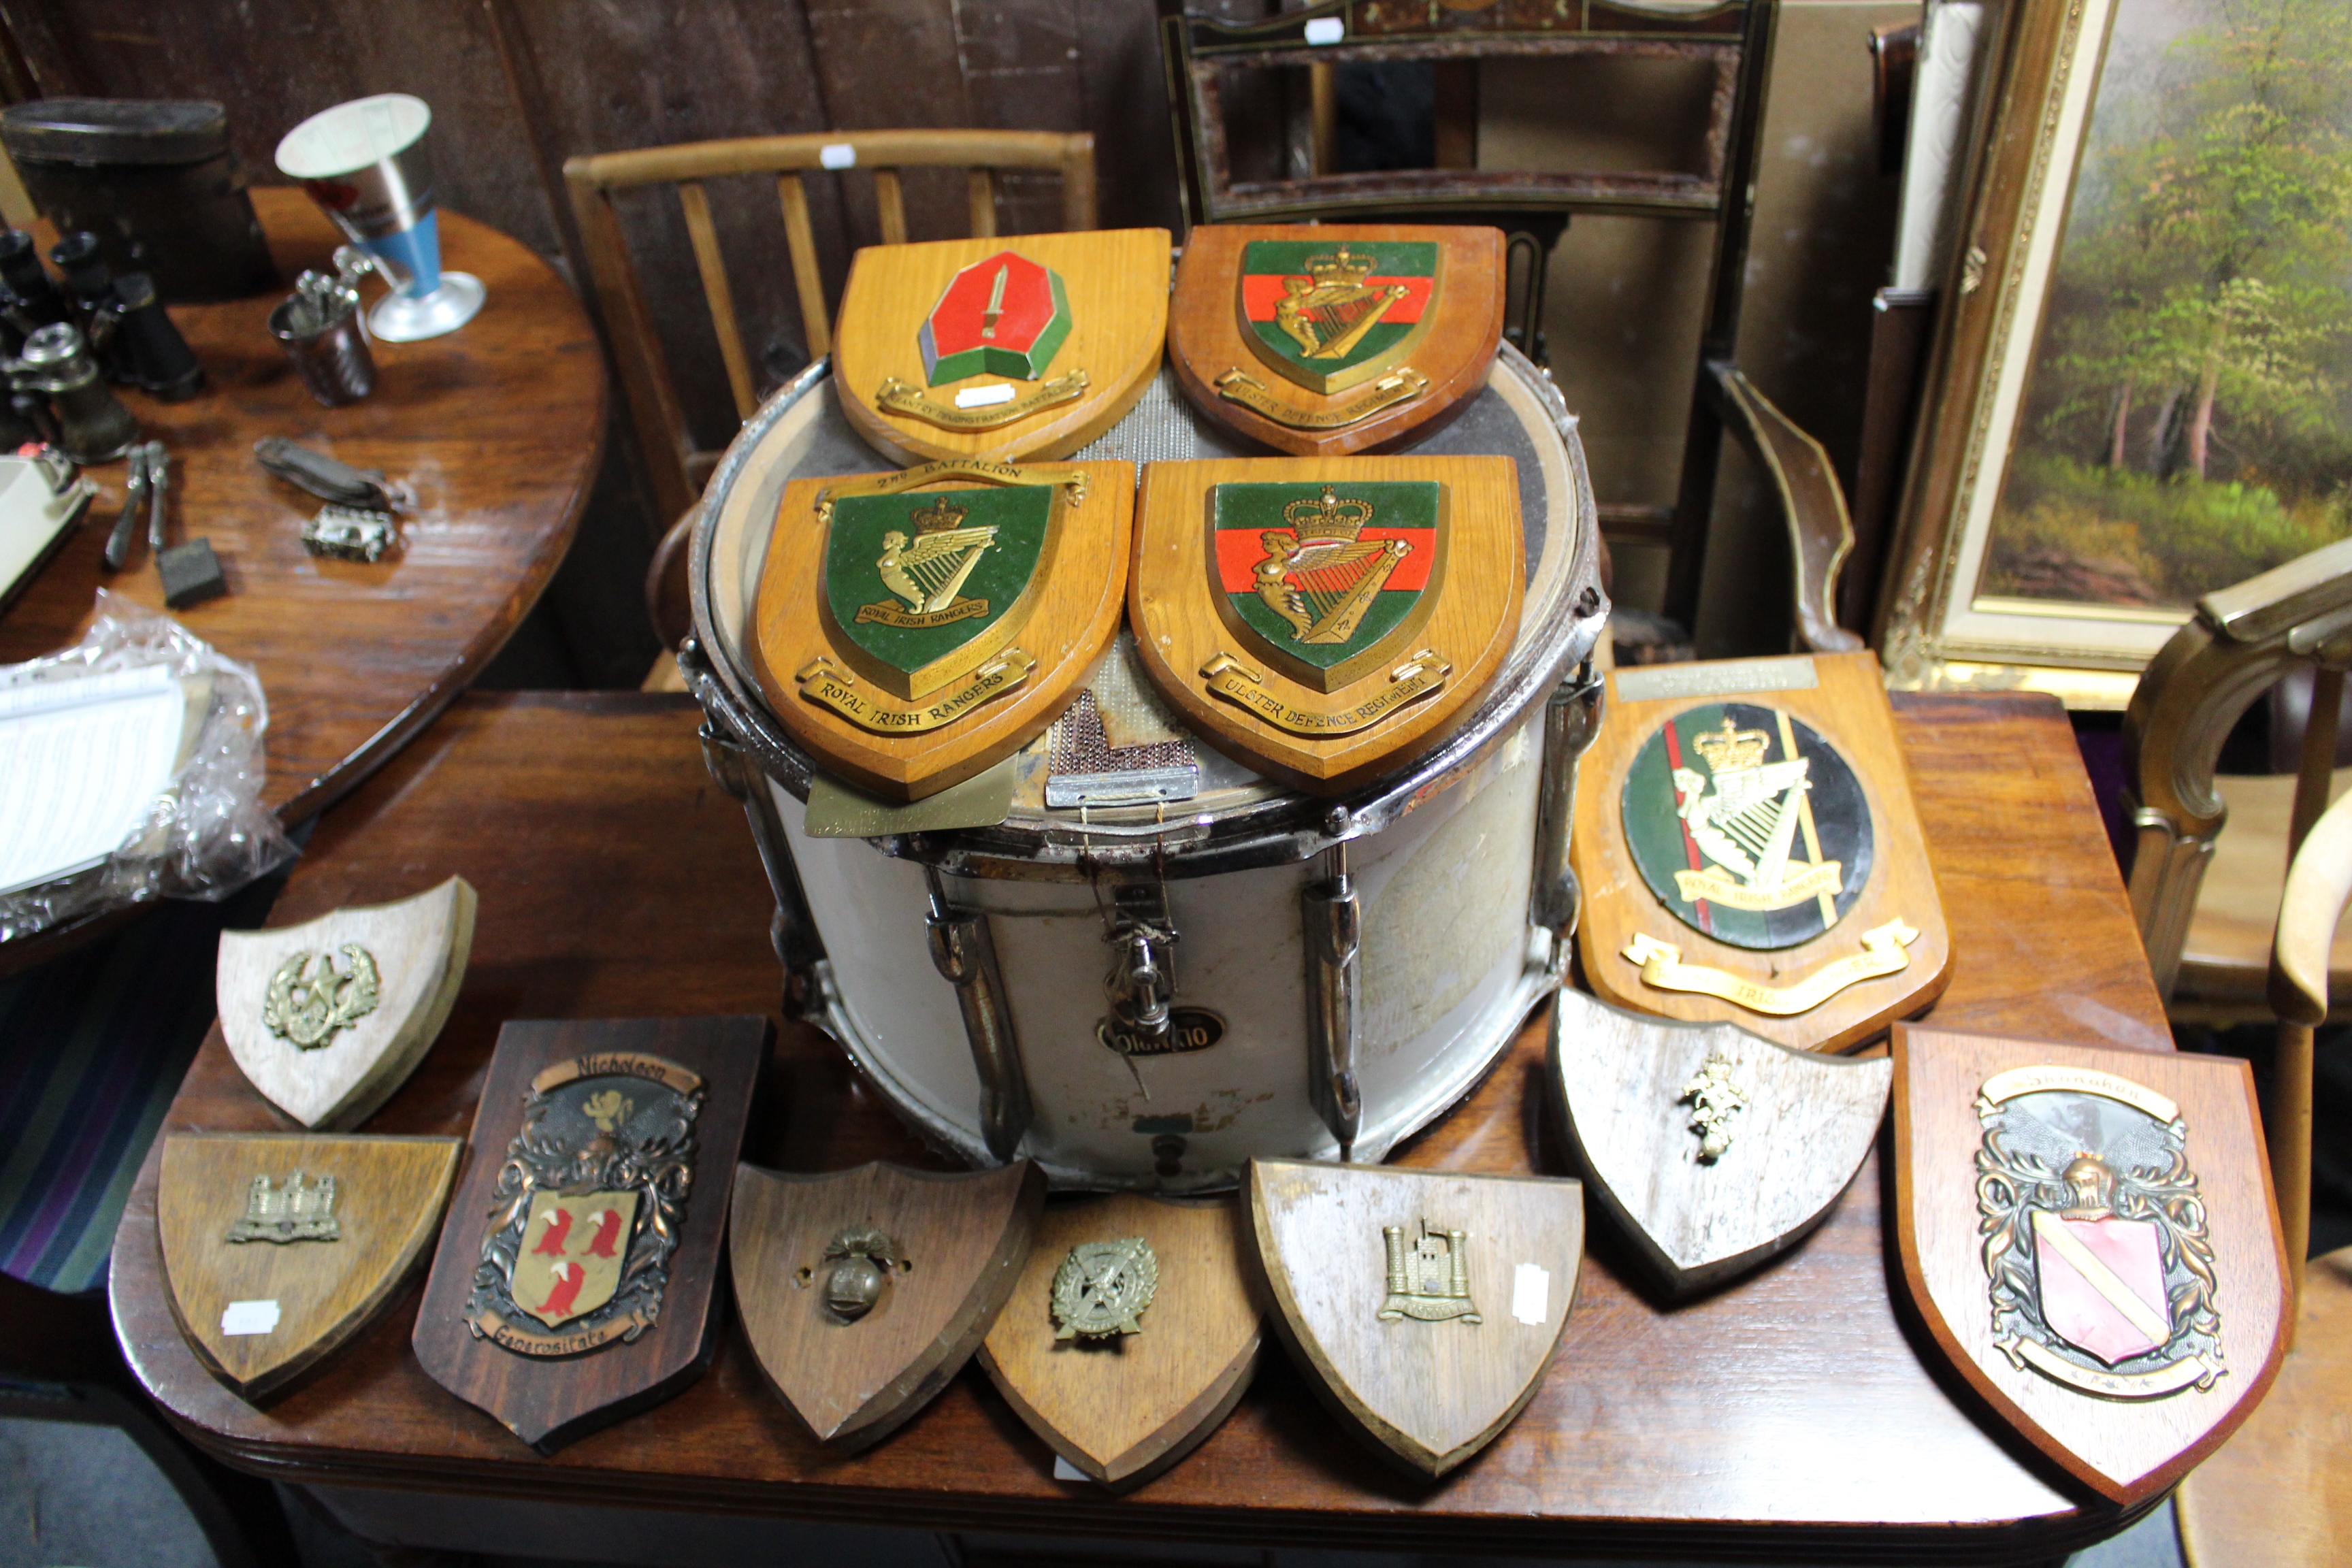 Thirteen regimental shield-shaped plaques; various military prints & documents; & a Remo snare